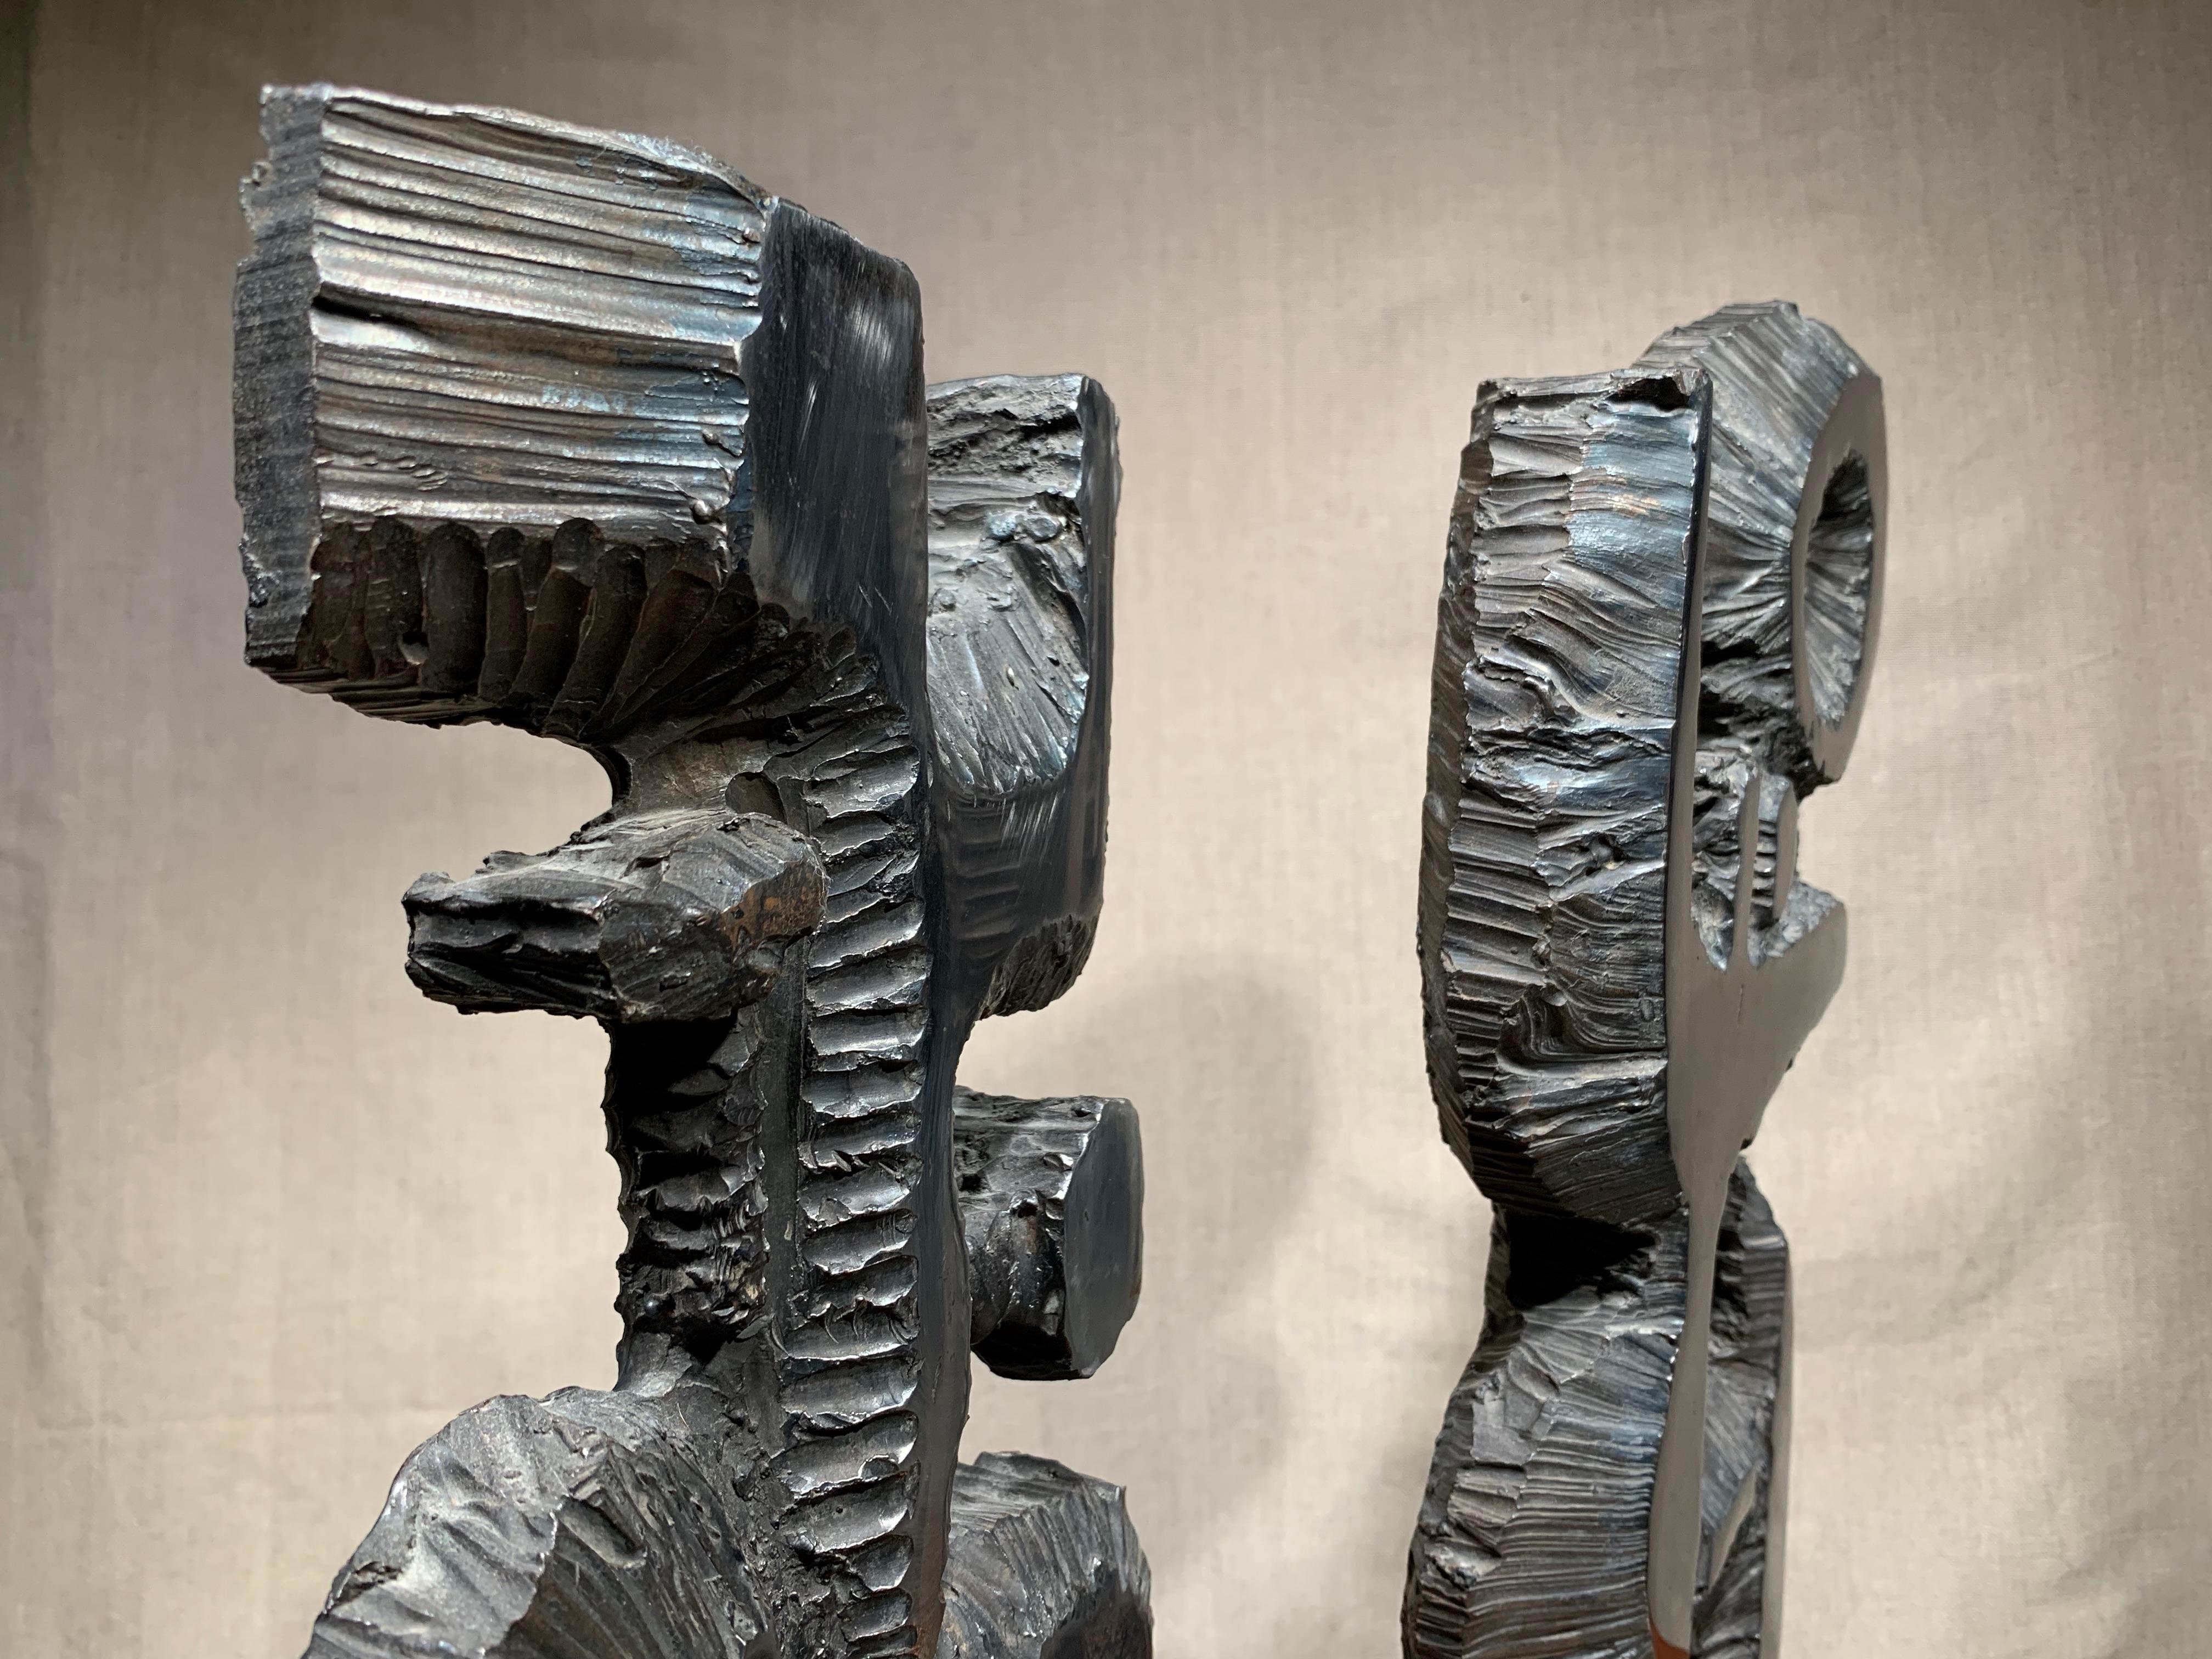 Fumio Otani (Japanese, 1929-1995). Untitled and Untitled, ca, 1965. Cast and polished steel. 

Smaller composition measures 14.75 x 7.75 x 1.5 inches.

Larger composition measures 16.75 x 11 x 1.5 inches.

Wood block base measures  3 inches (h); 6